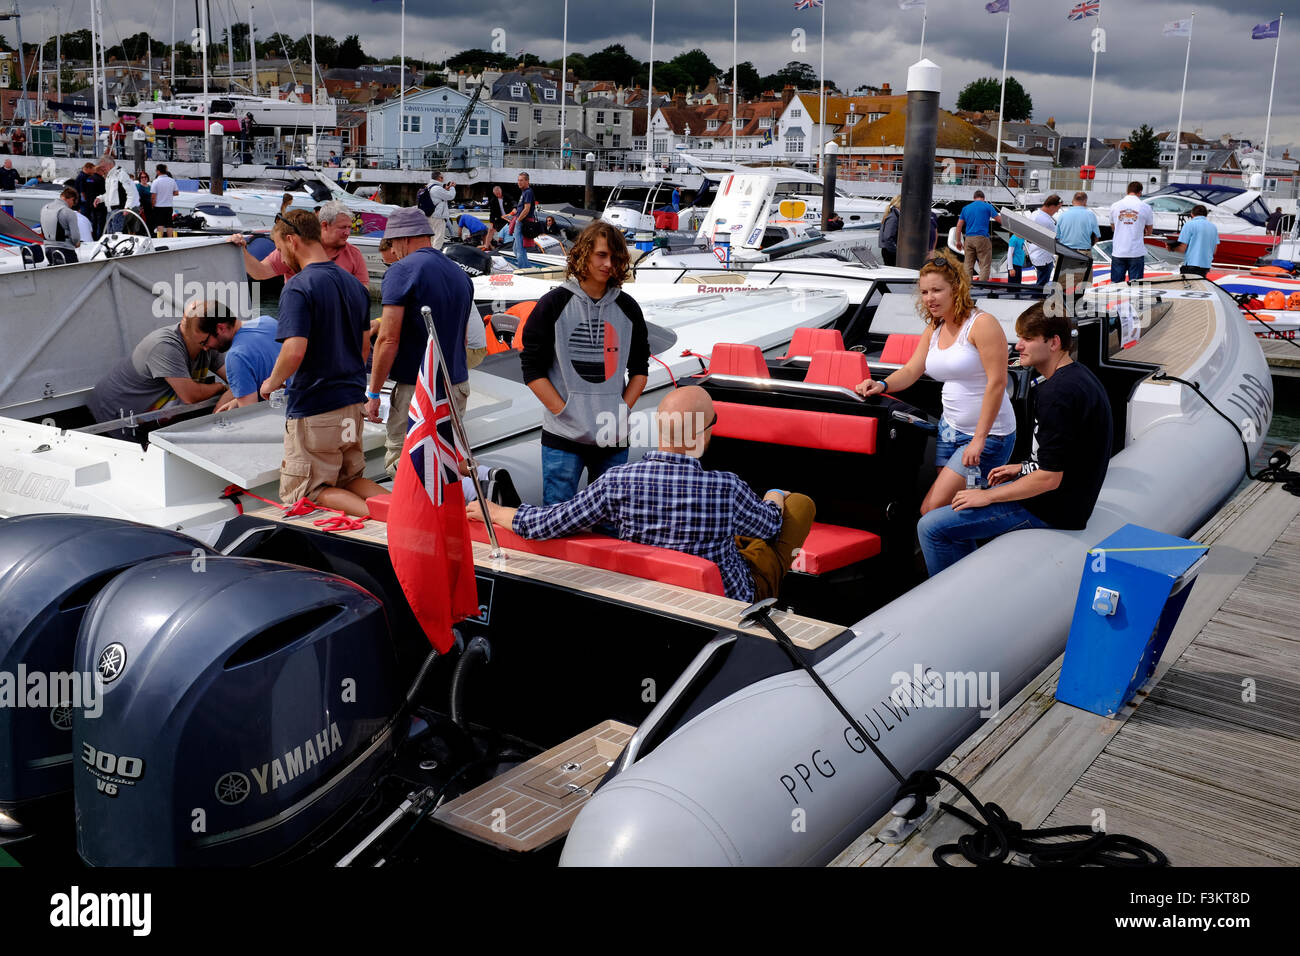 The Yacht Haven 2015, Cowes Classic, Power Boat Race, Cowes, Isle of Wight, England, UK, Stock Photo